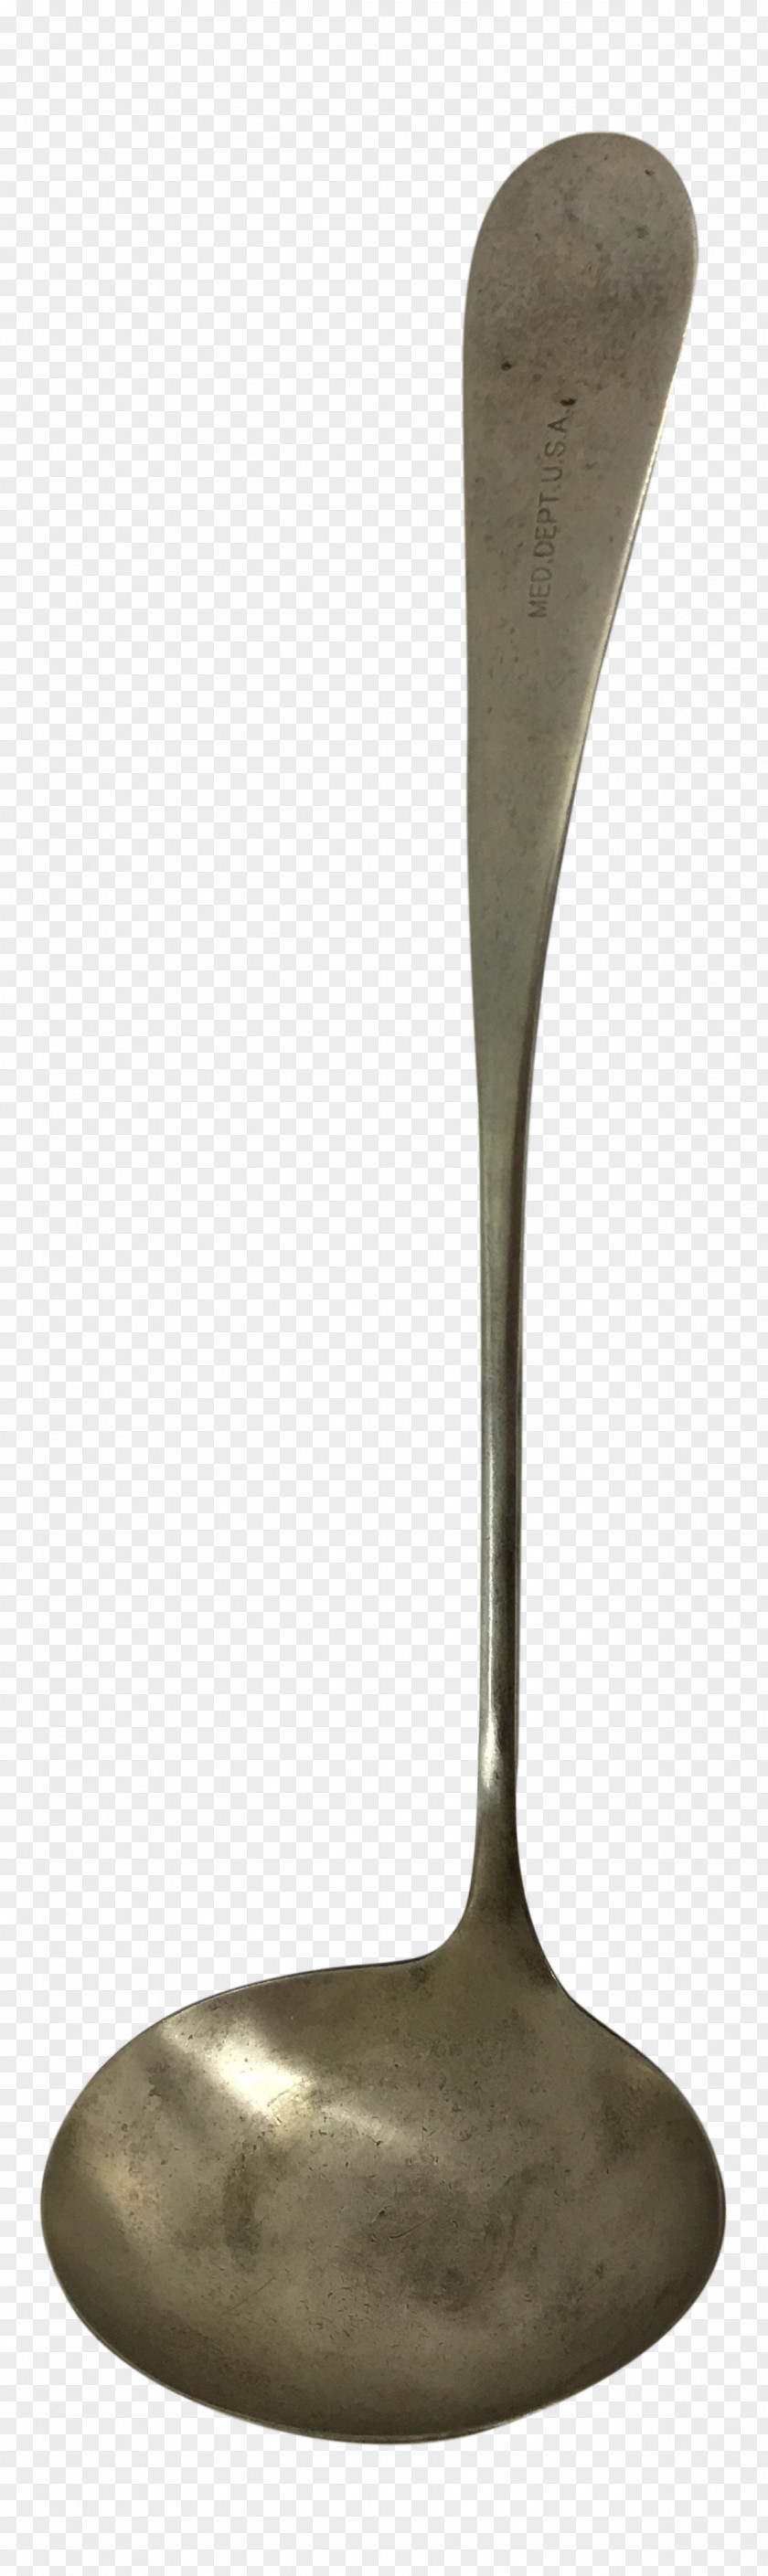 Metal Cutlery Background PNG